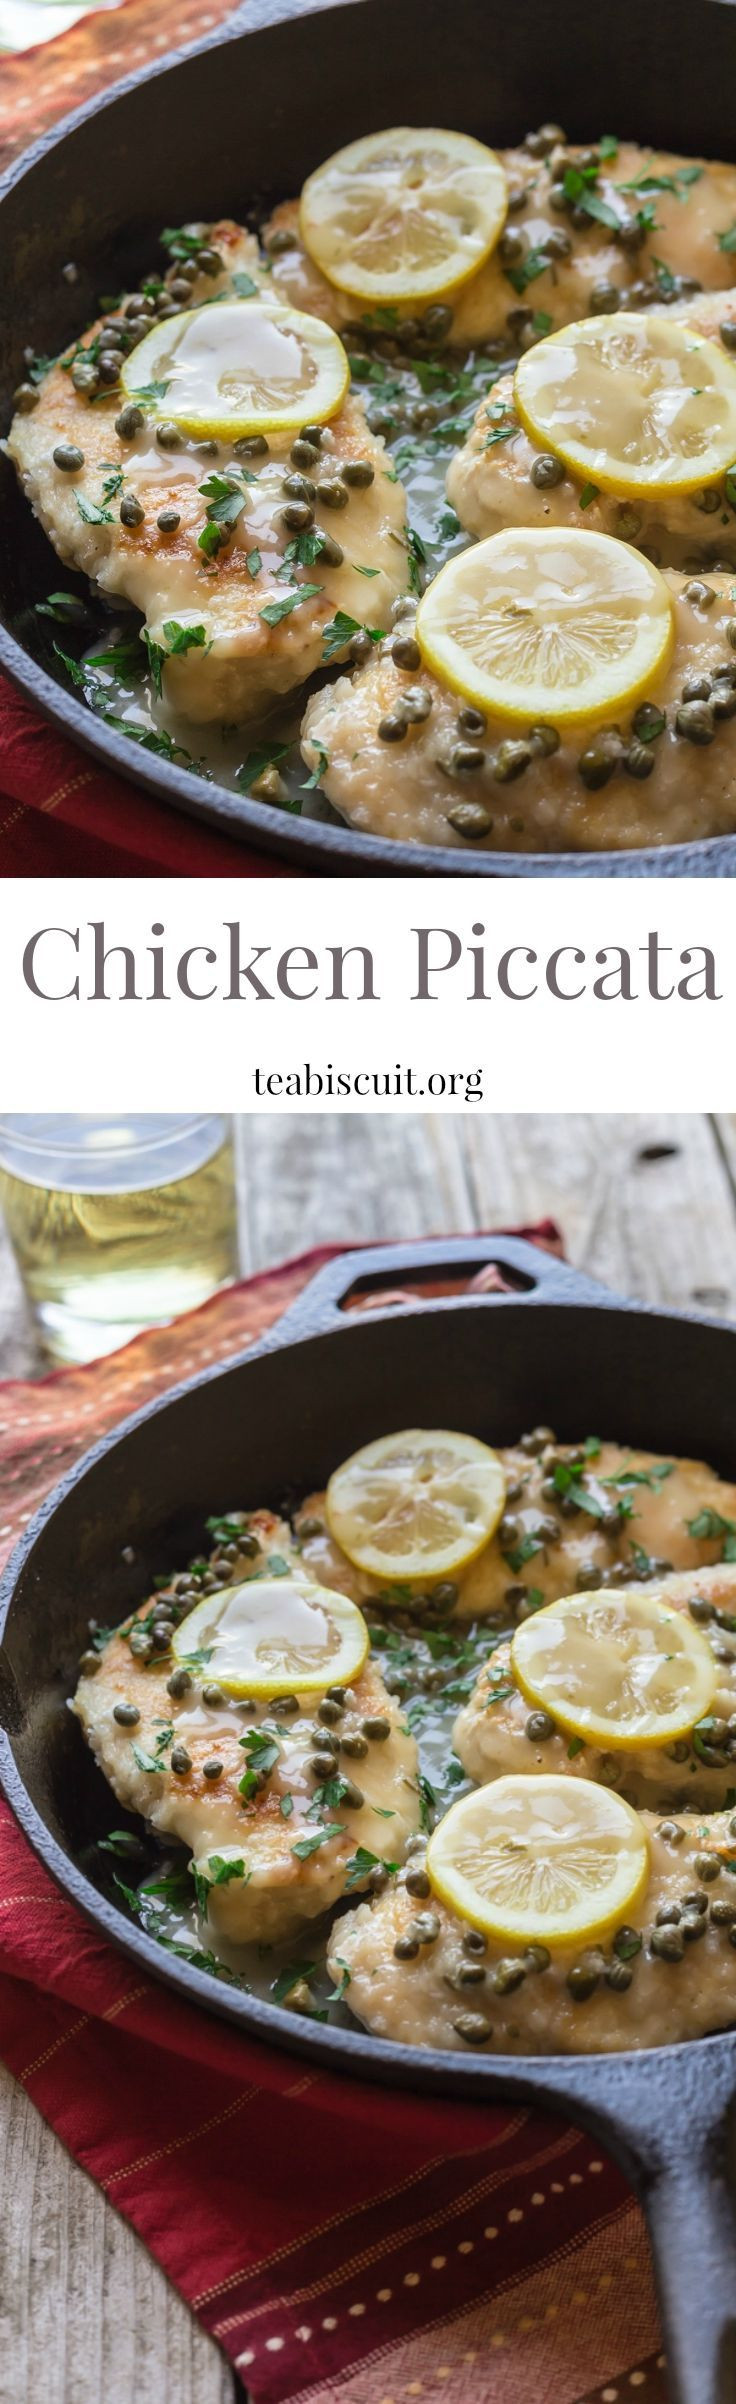 Easy Low Calorie Chicken Recipes
 Easy Weeknight Chicken Piccata ready in less than 30